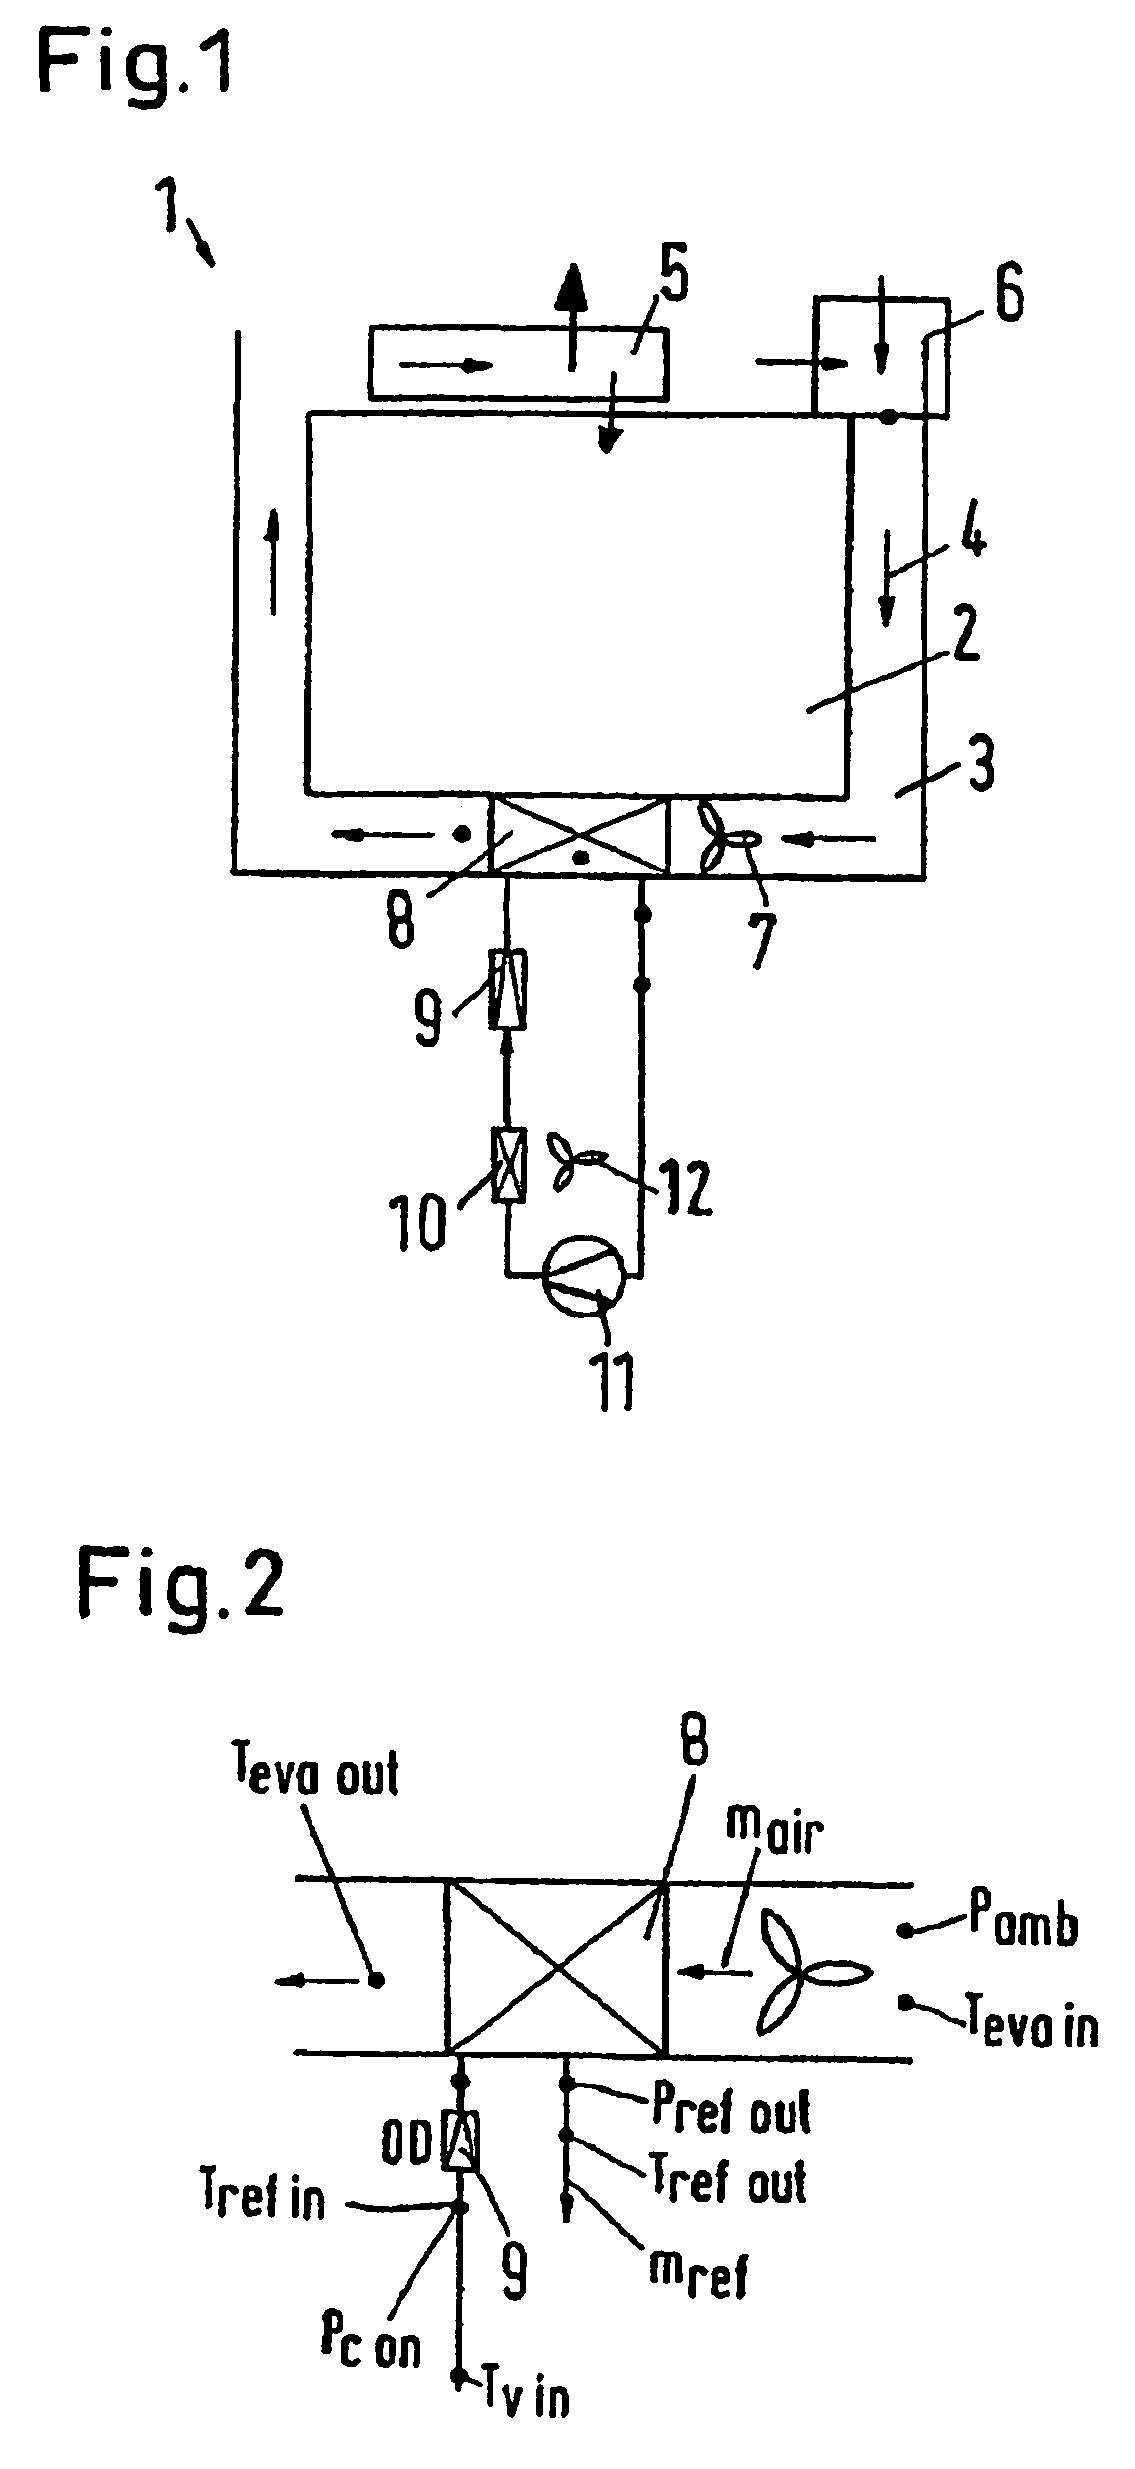 Method for detecting changes in a first media flow of a heat or cooling medium in a refrigeration system